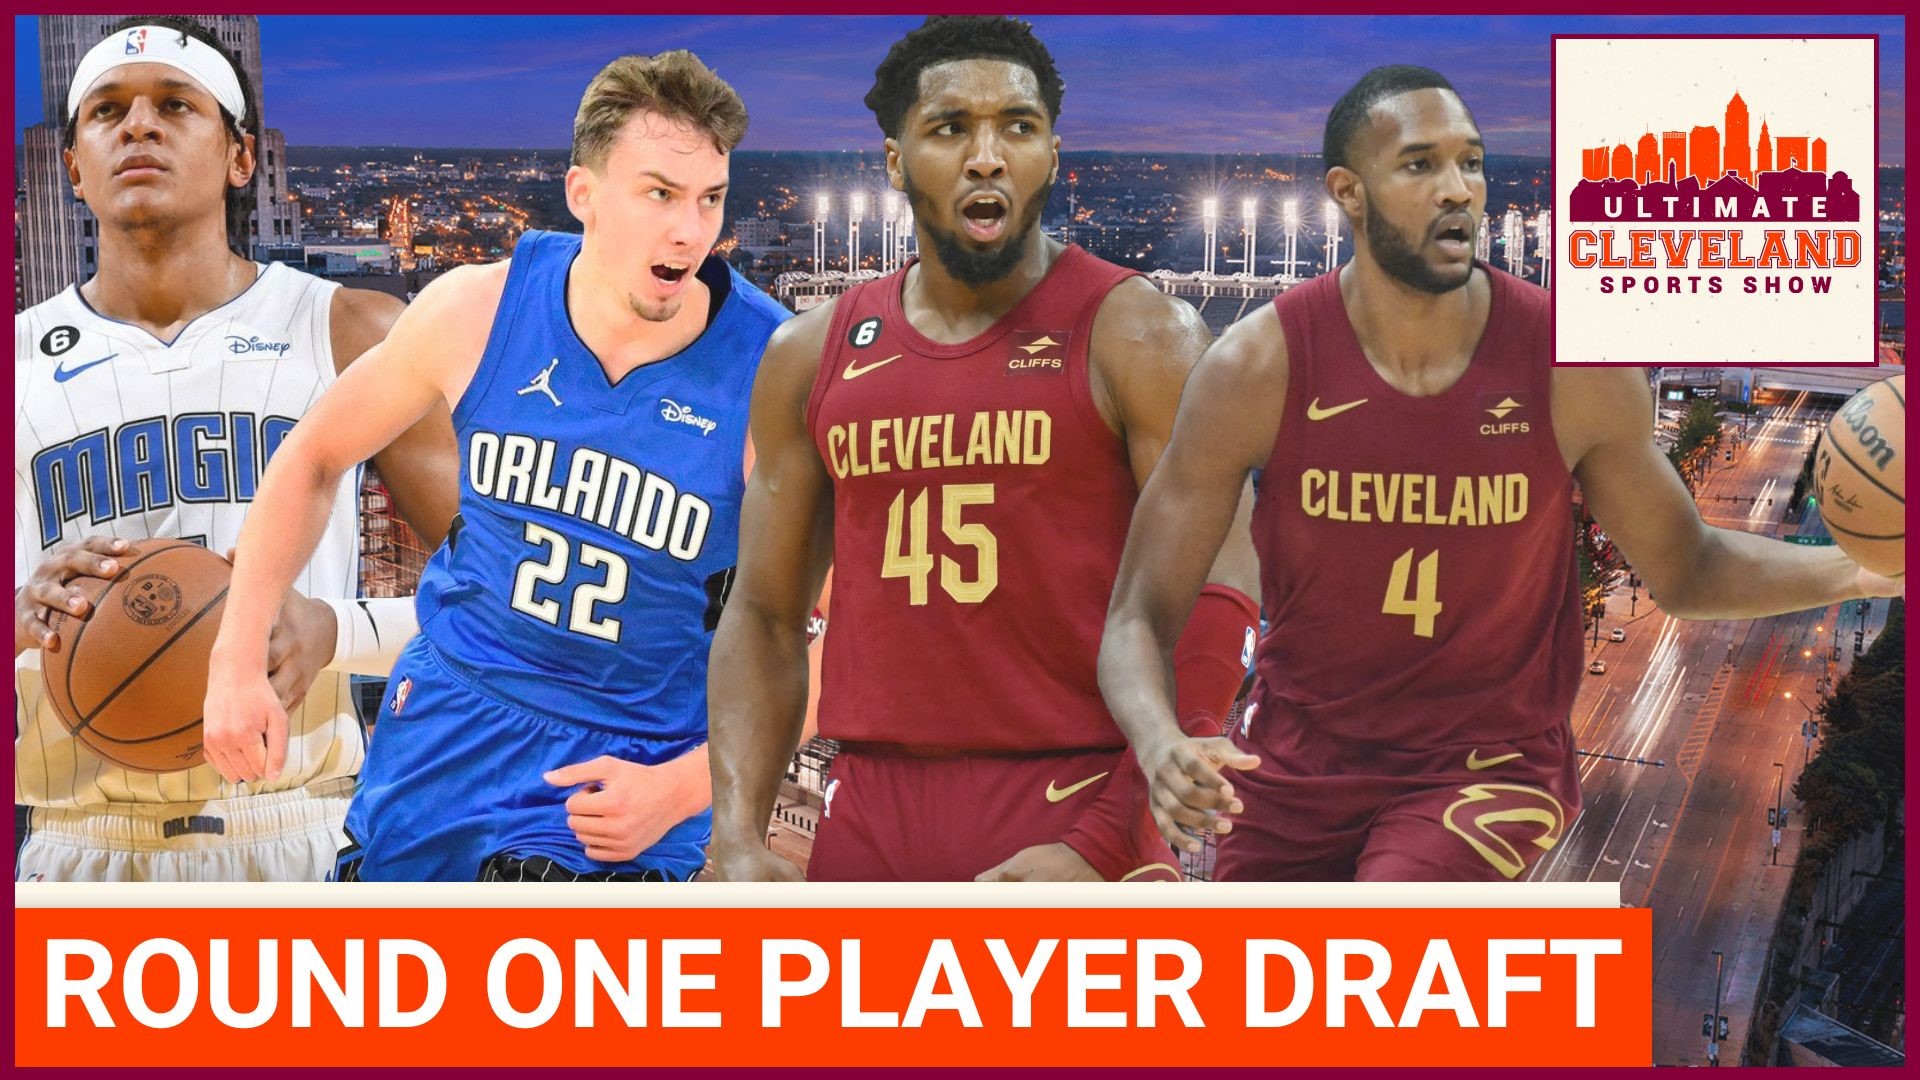 Do the Cavaliers have a better roster than the Orlando Magic? UCSS does a ten-player draft, including players from both teams